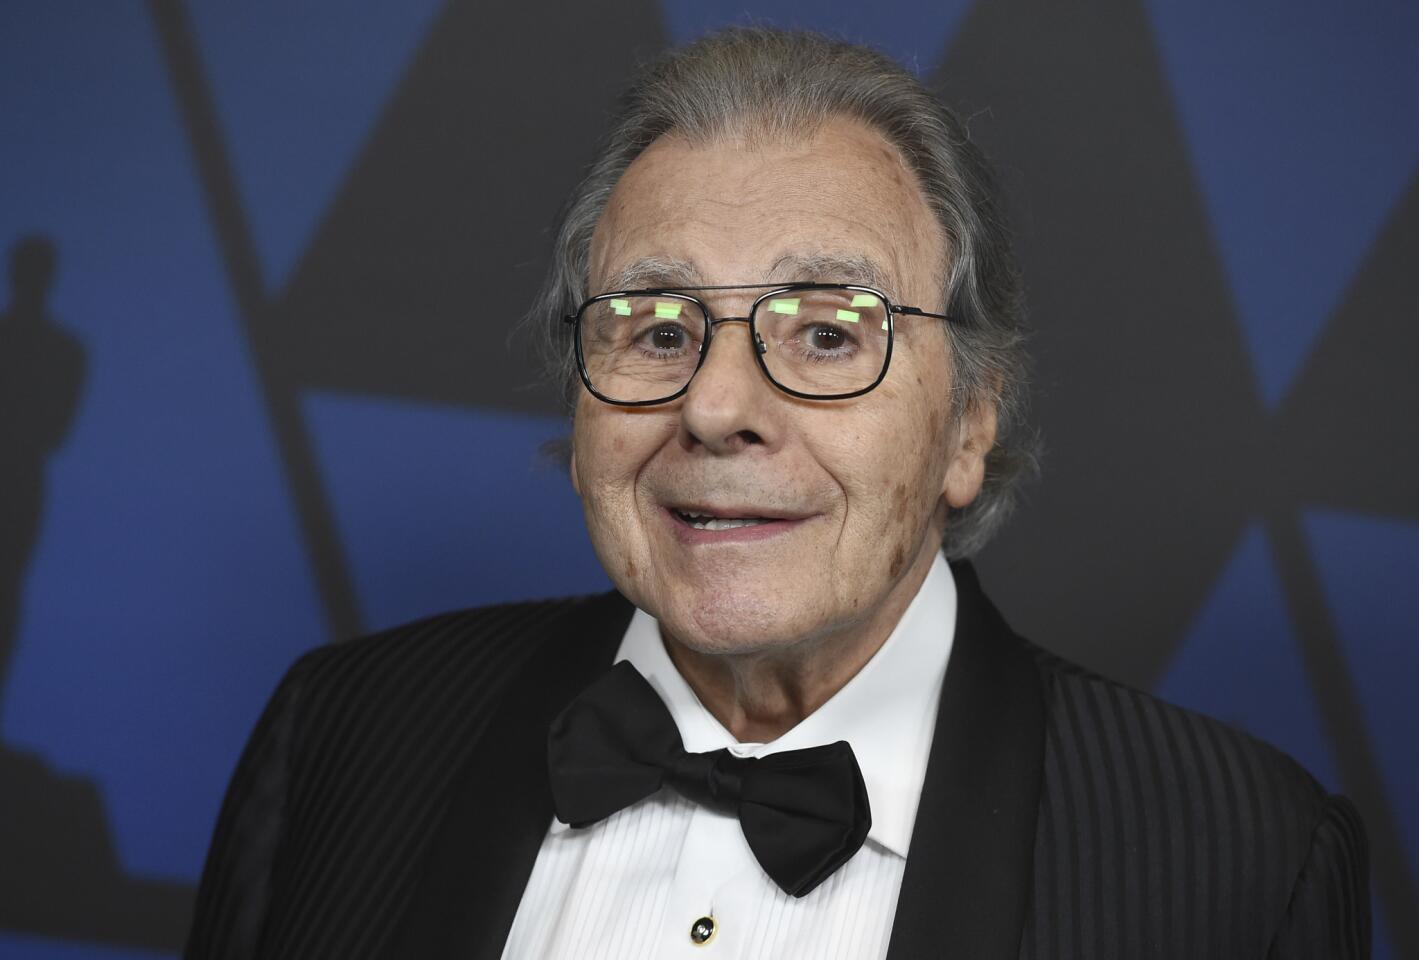 Honoree Lalo Schifrin arrives at the Governors Awards at the Dolby Theatre in Los Angeles.